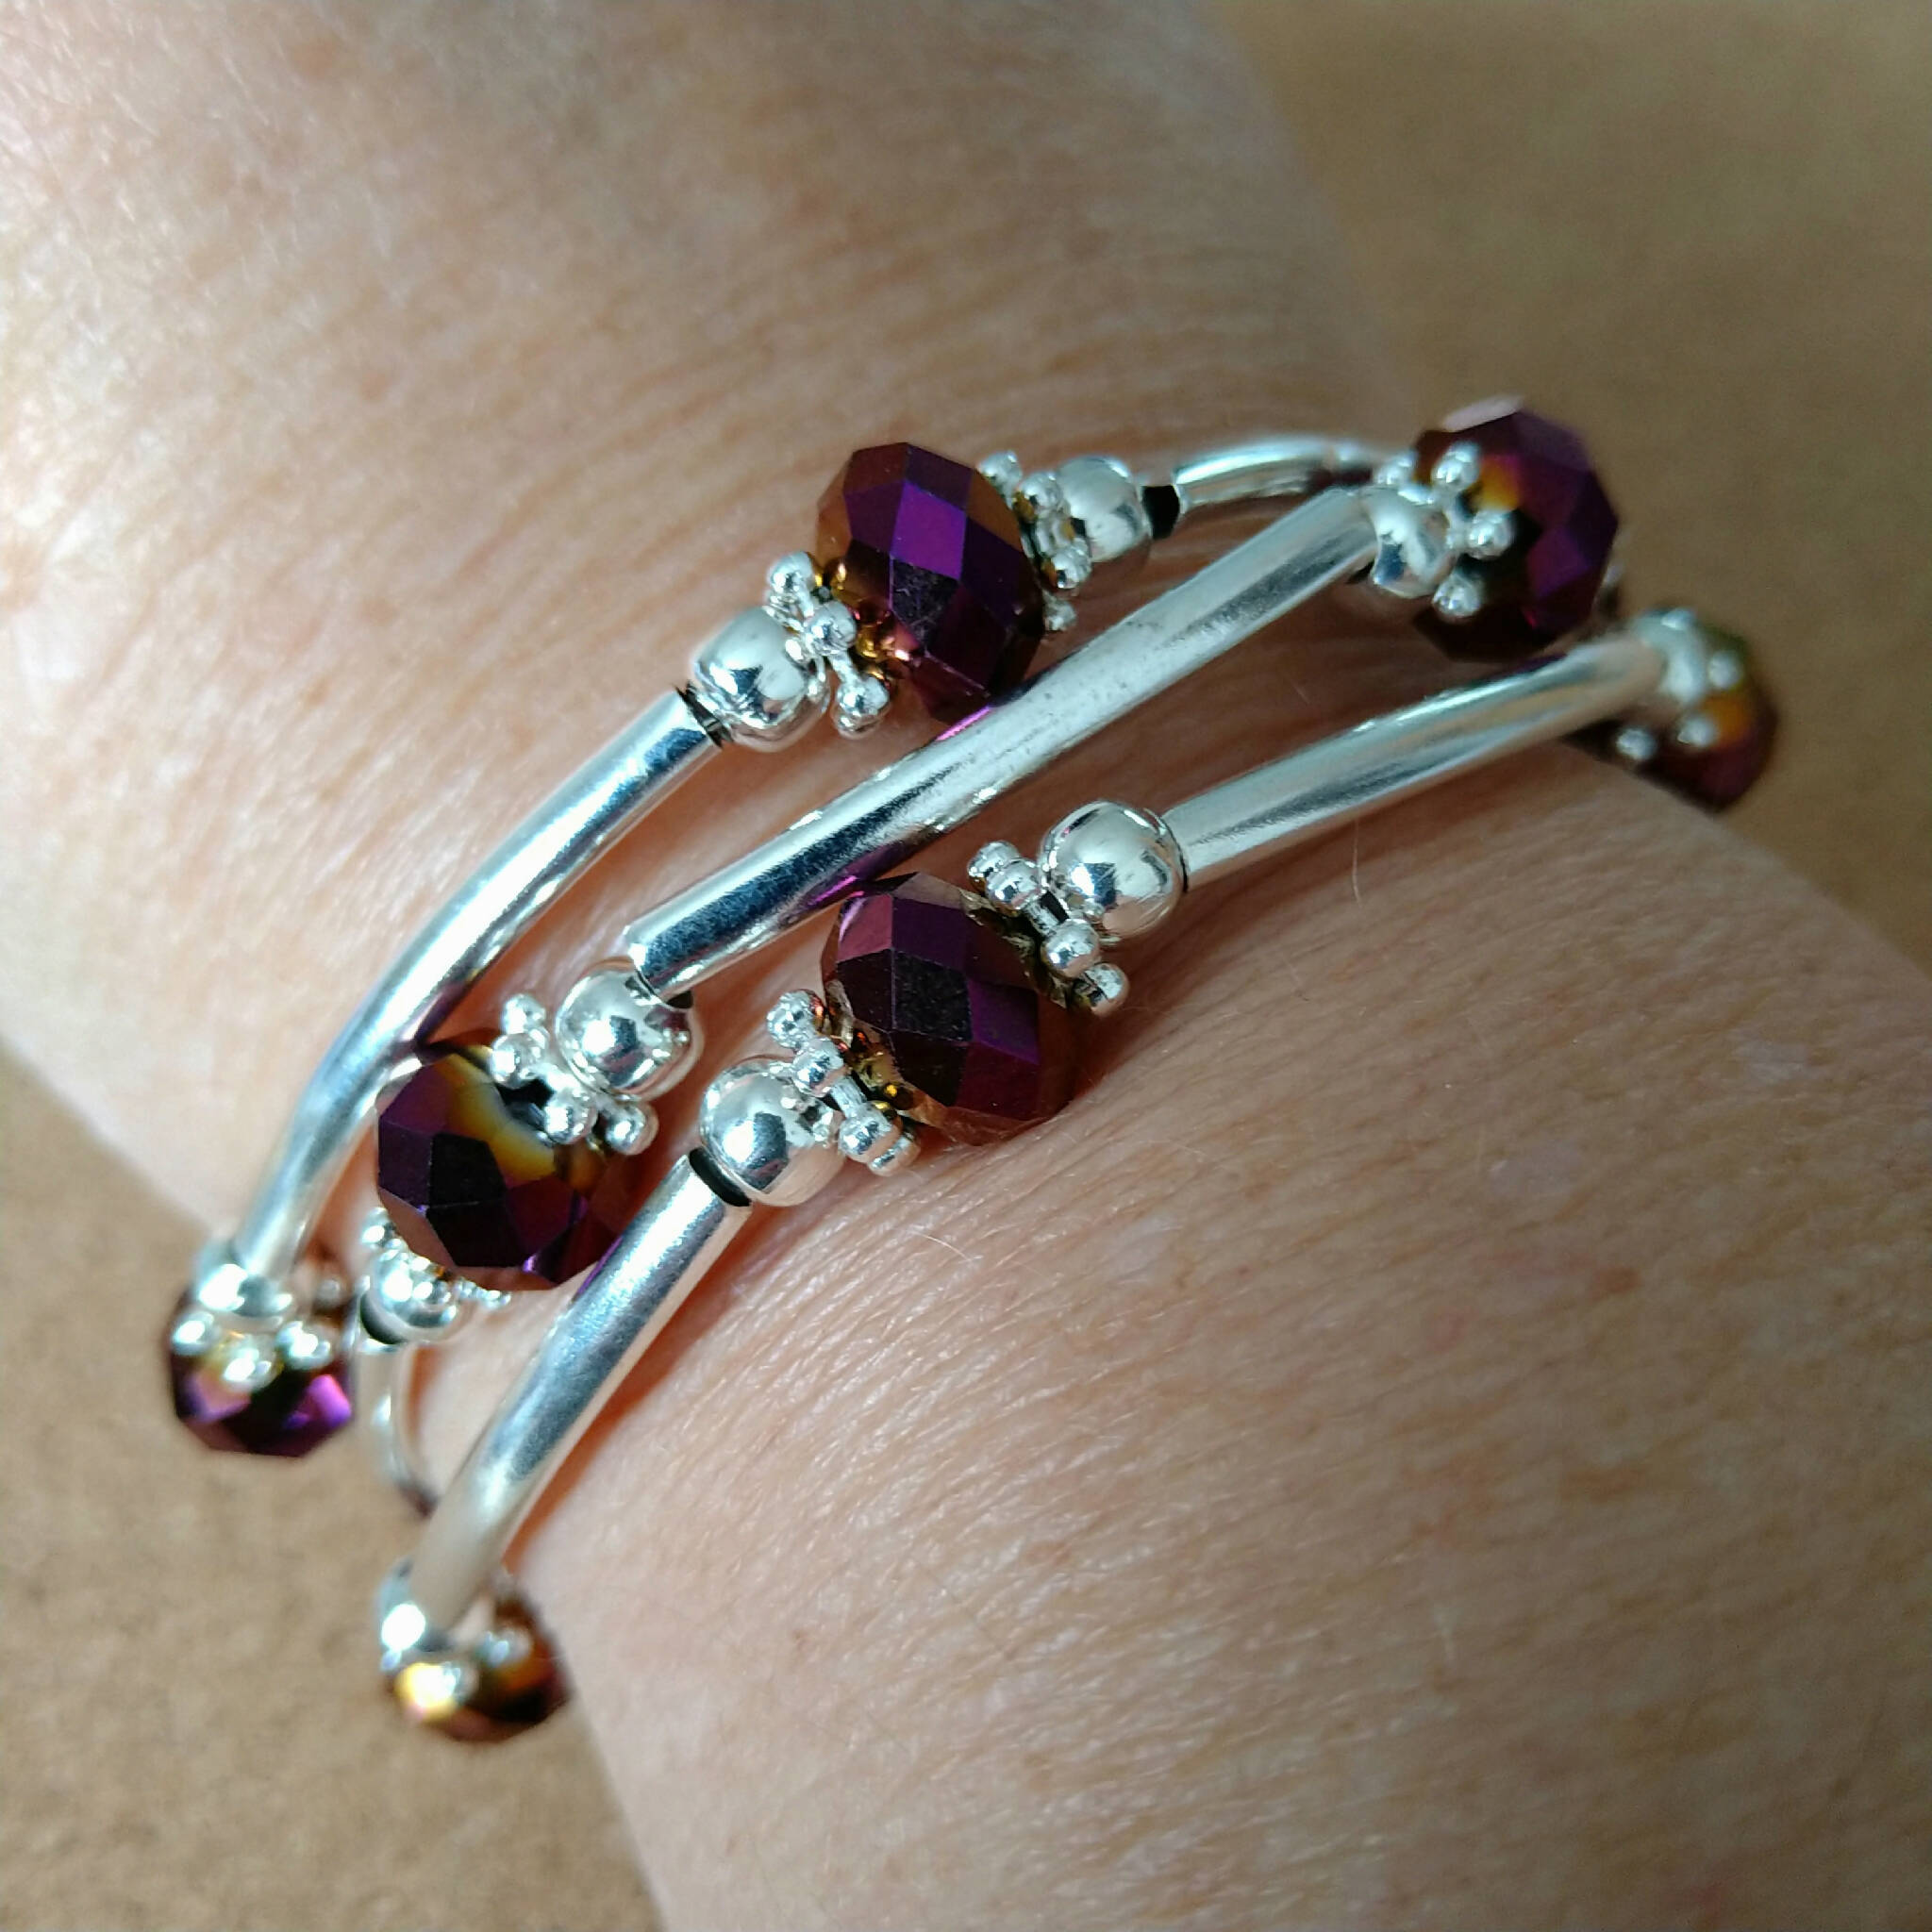 2.5 strand silver toned memory wire bangle with purple AB & silver coloured beads, 6.5cm diameter